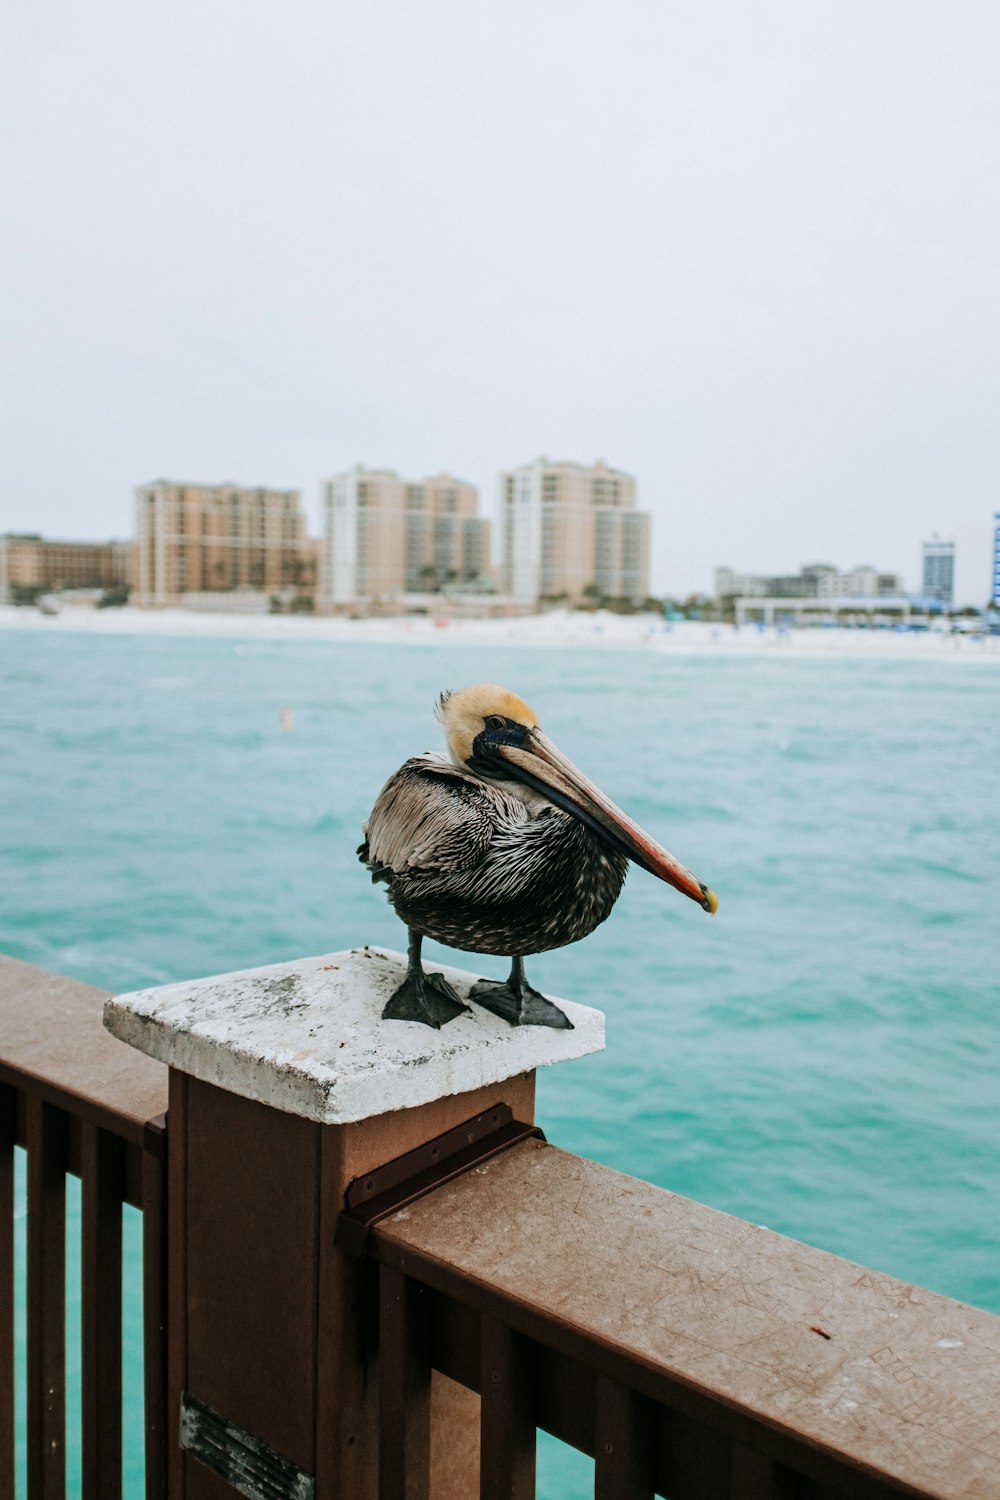 a pelican sits on a railing overlooking the ocean